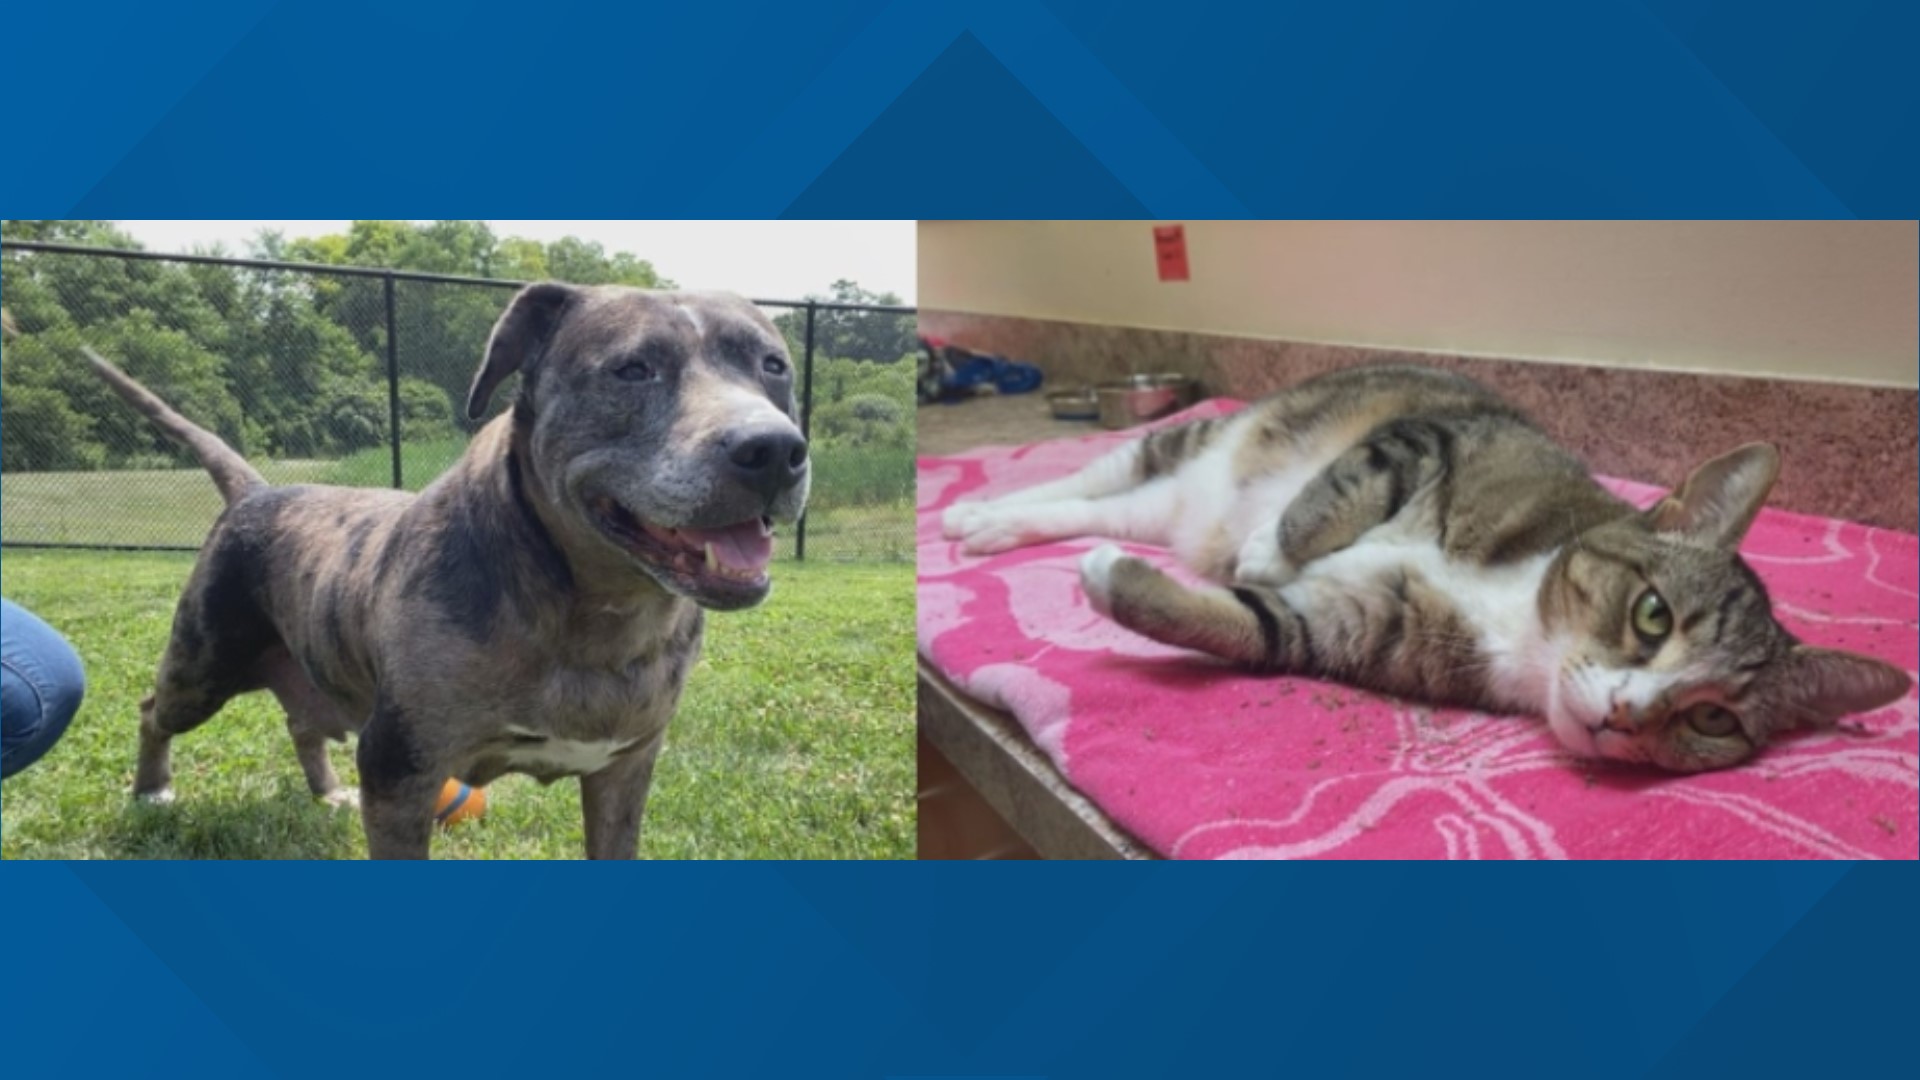 Desi and Millie Bobbie Brown are both looking for their new homes at the York County SPCA.